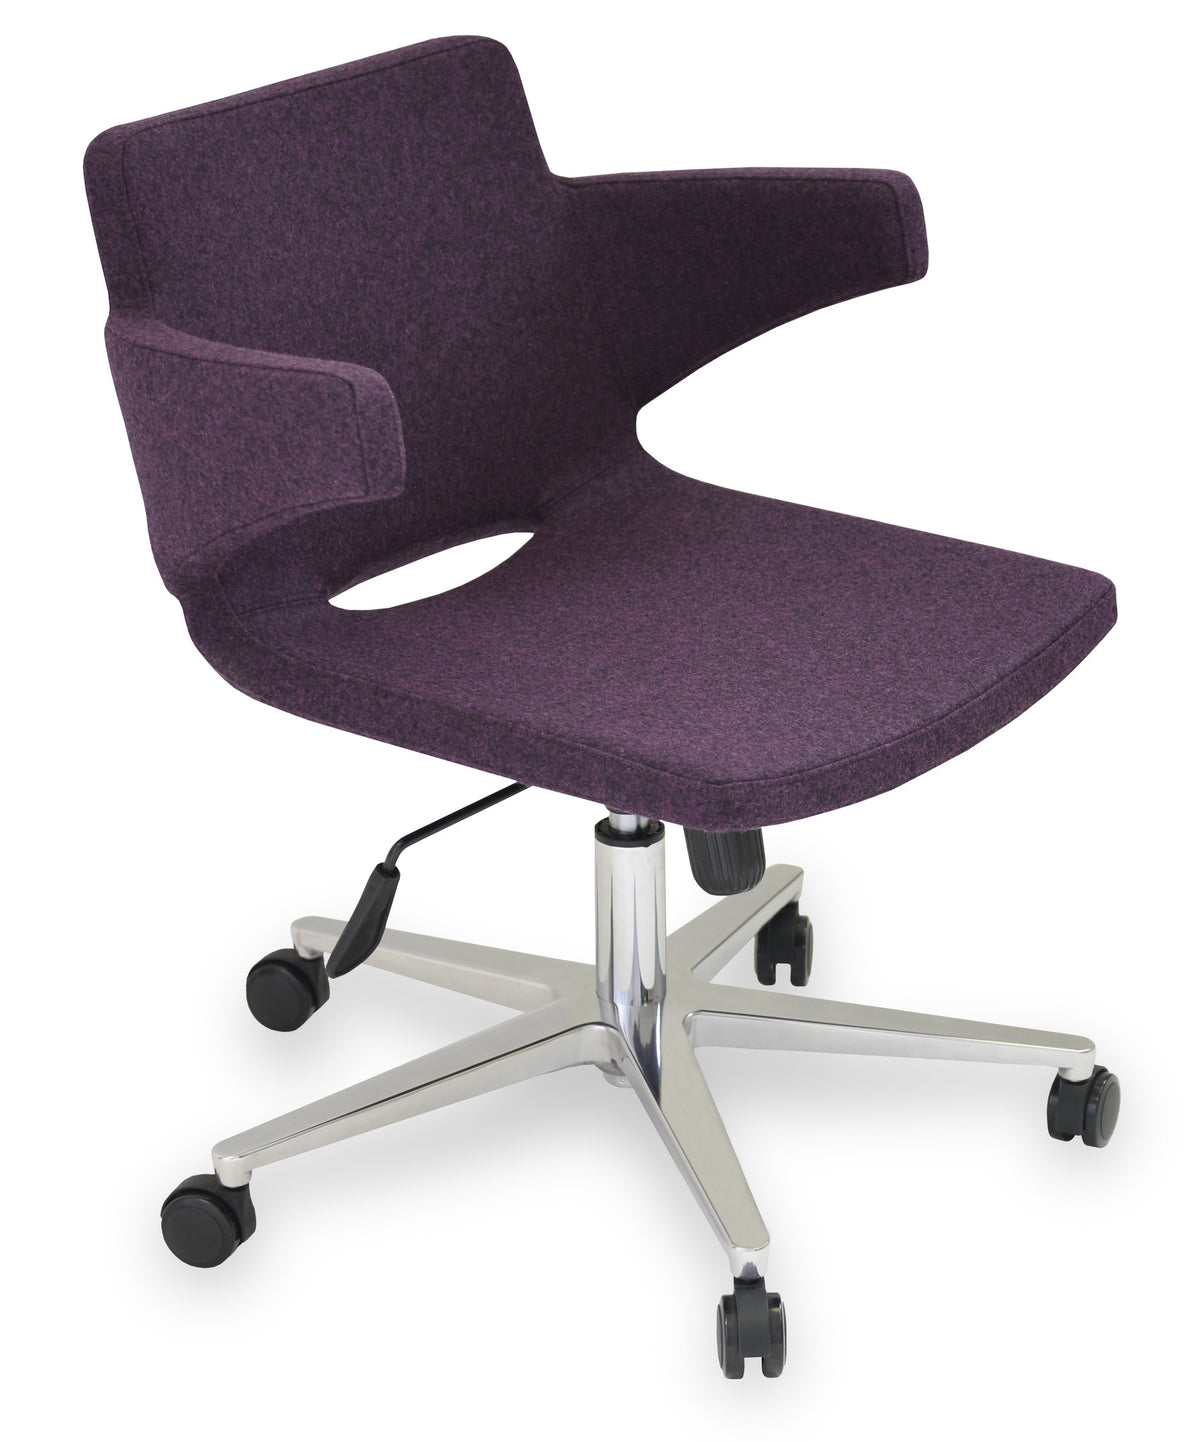 Nevada Arm Office Chair by Soho Concept